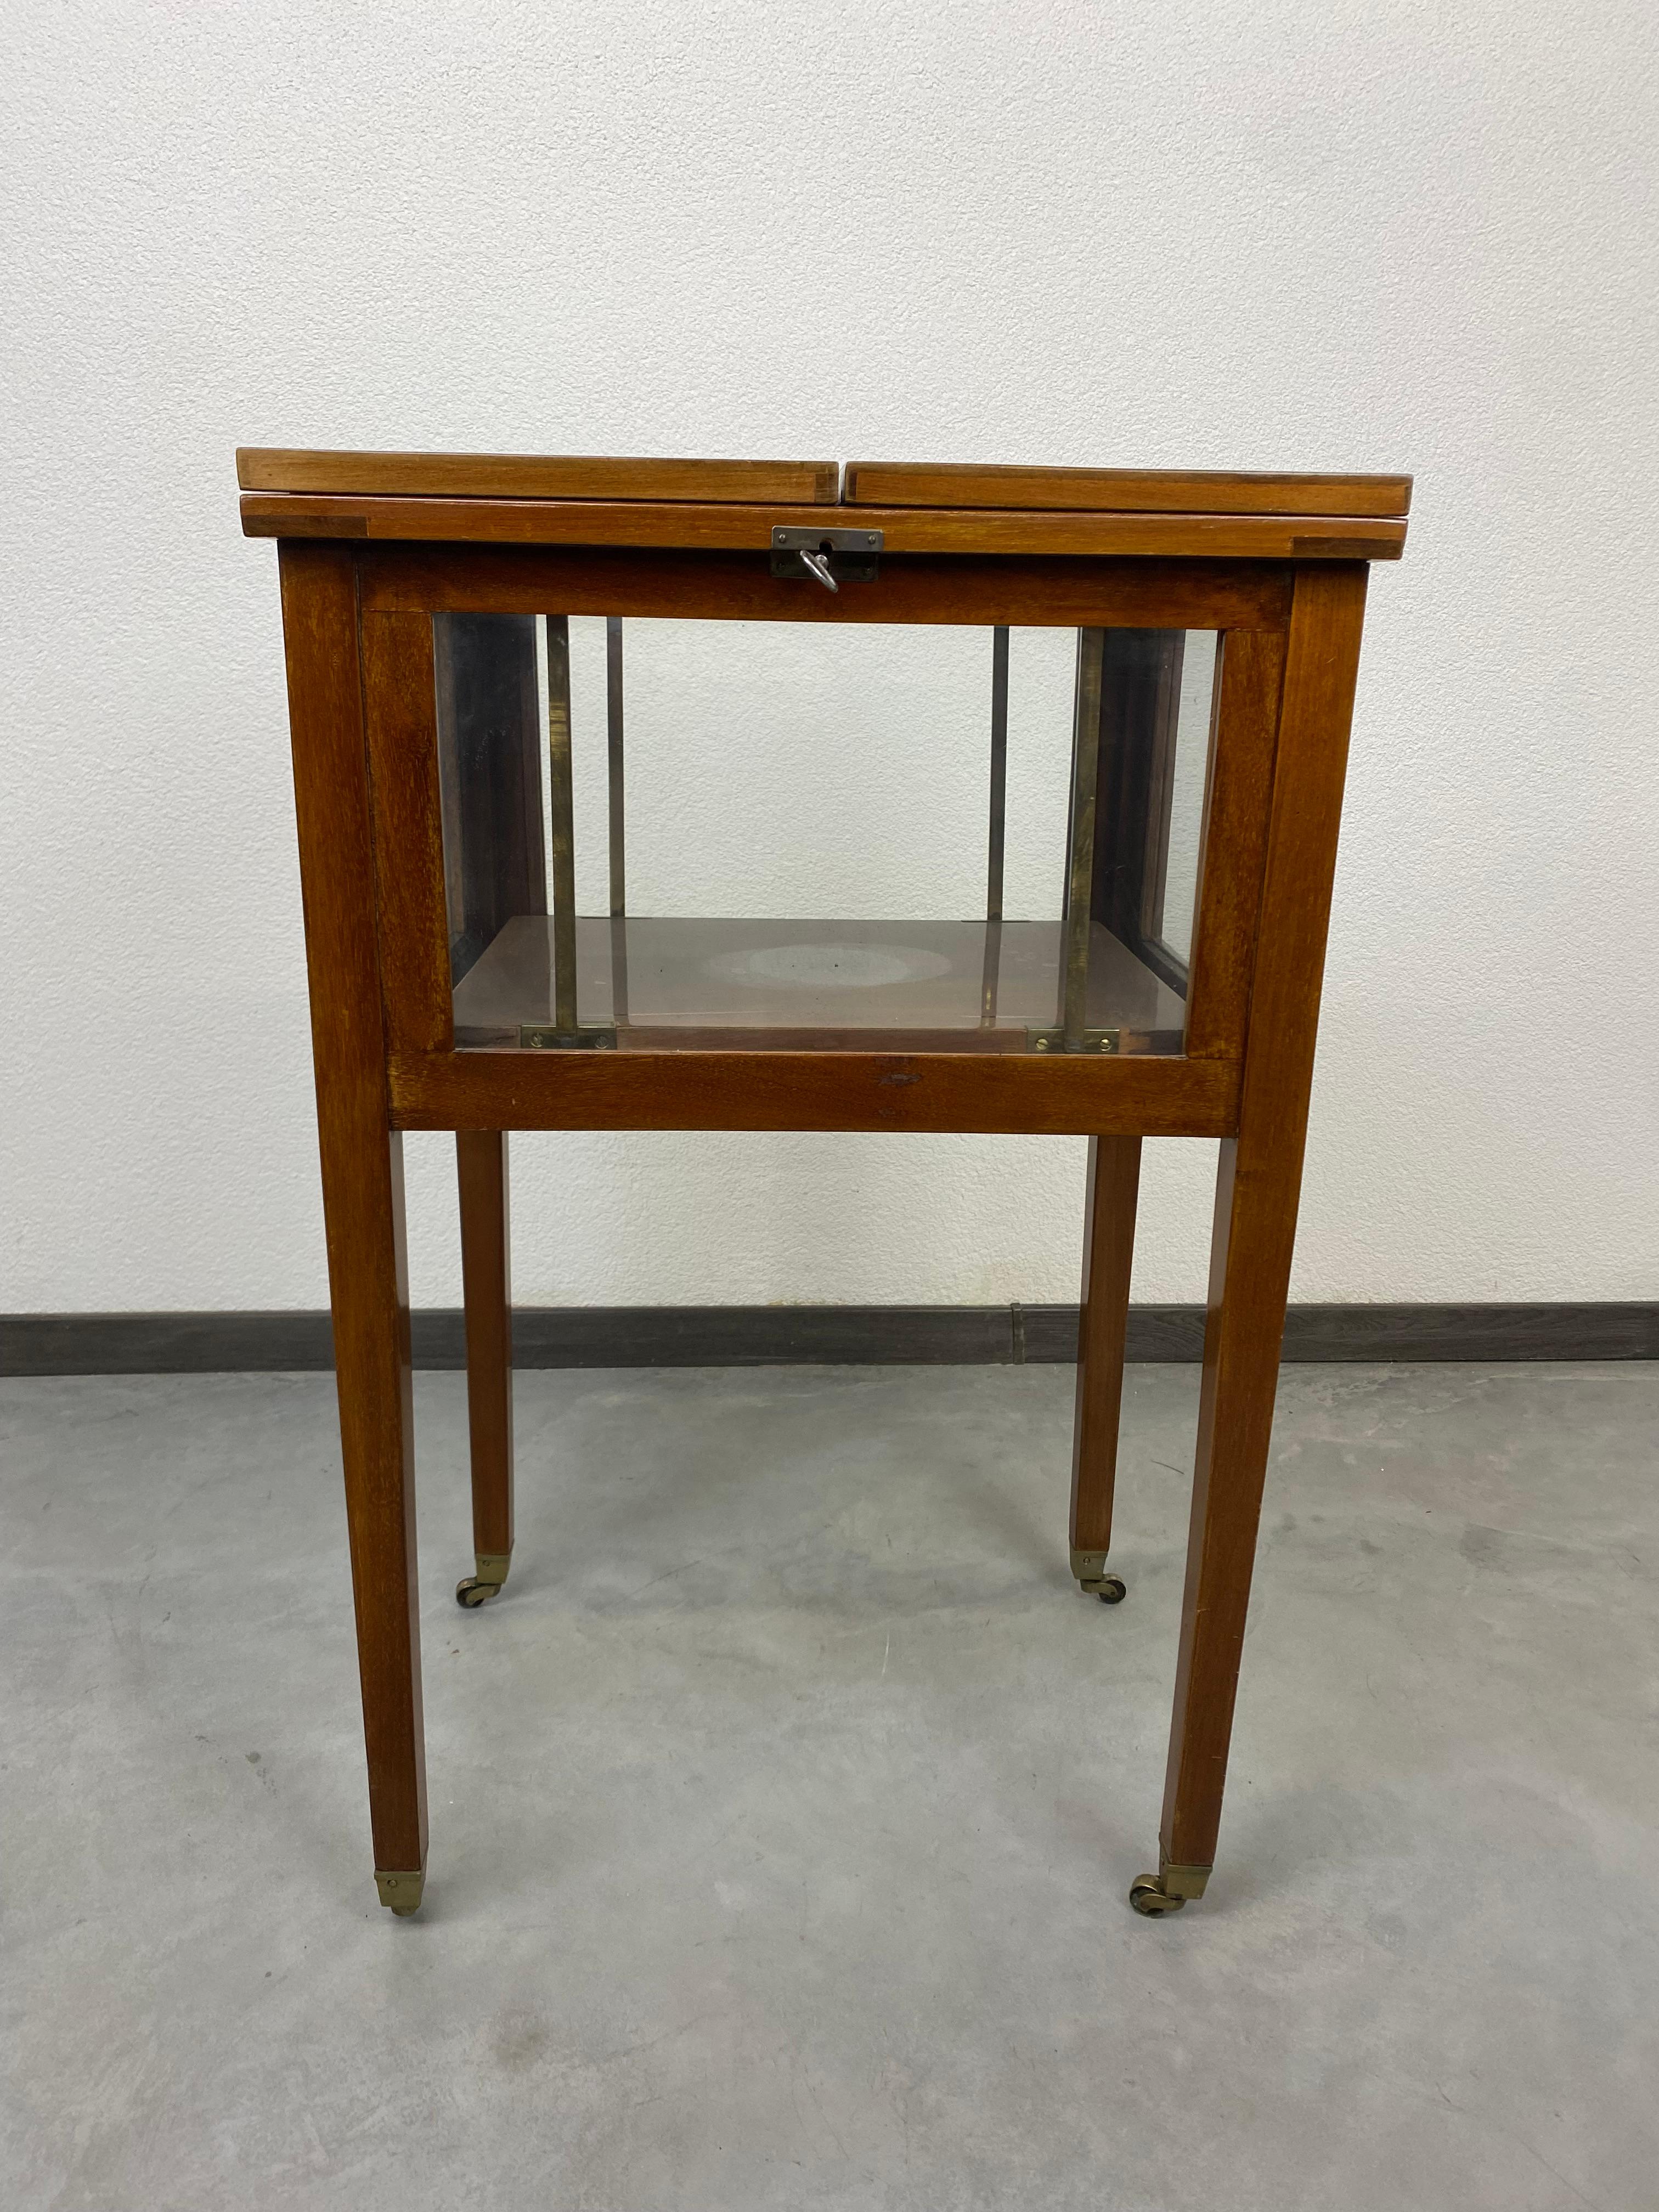 Secession bar table. When opened, a shelf wtih alcohol comes out. Two female nudes appear on the inside. These are the prints under the glass. Overall condition is fine with signs of usage. Total width after expansion is 100cm.